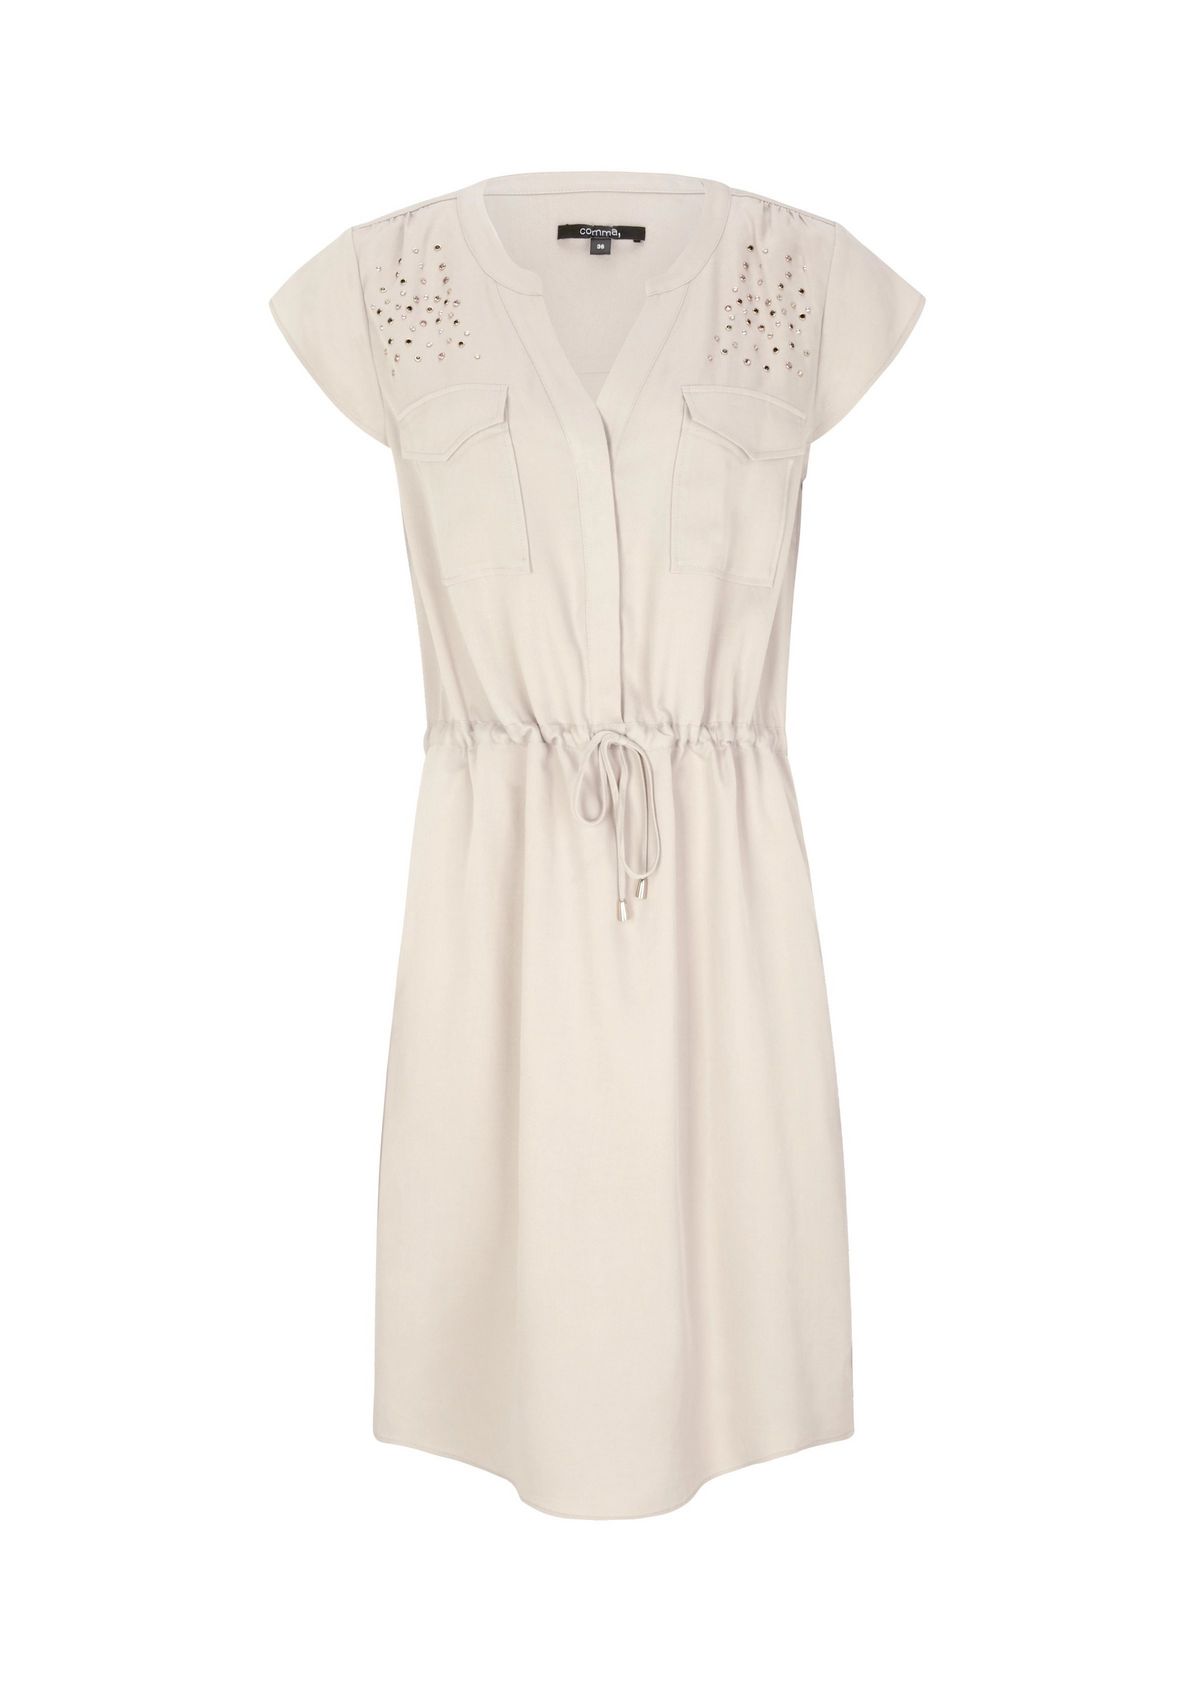 Lightweight dress with appliqués from comma